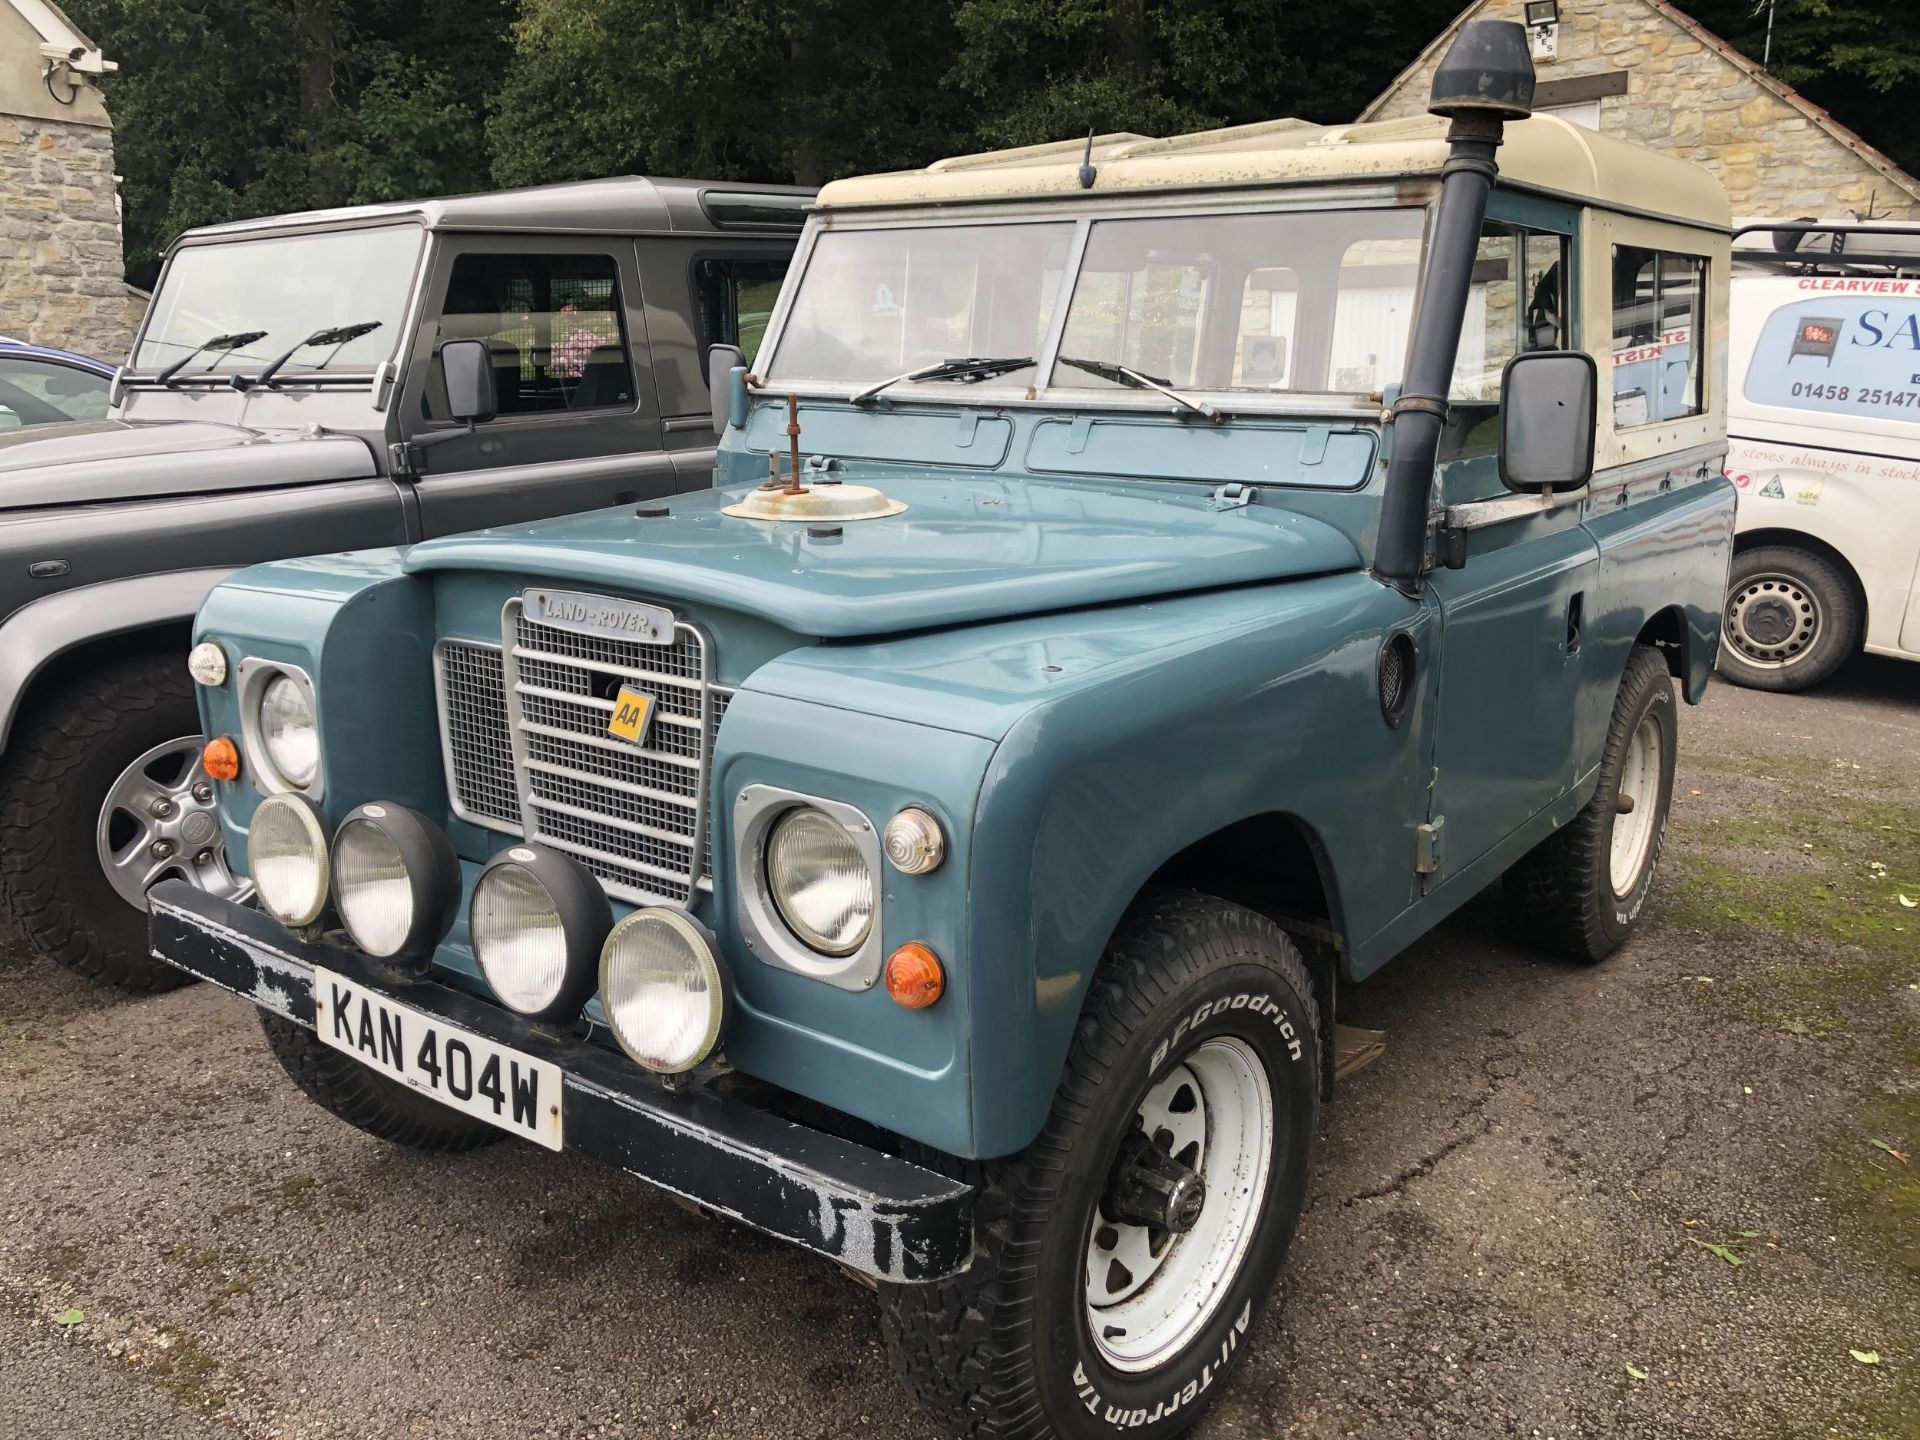 1981 Land Rover 88 inch Series III Registration number KAN 404W Blue with a white roof 2,286 cc